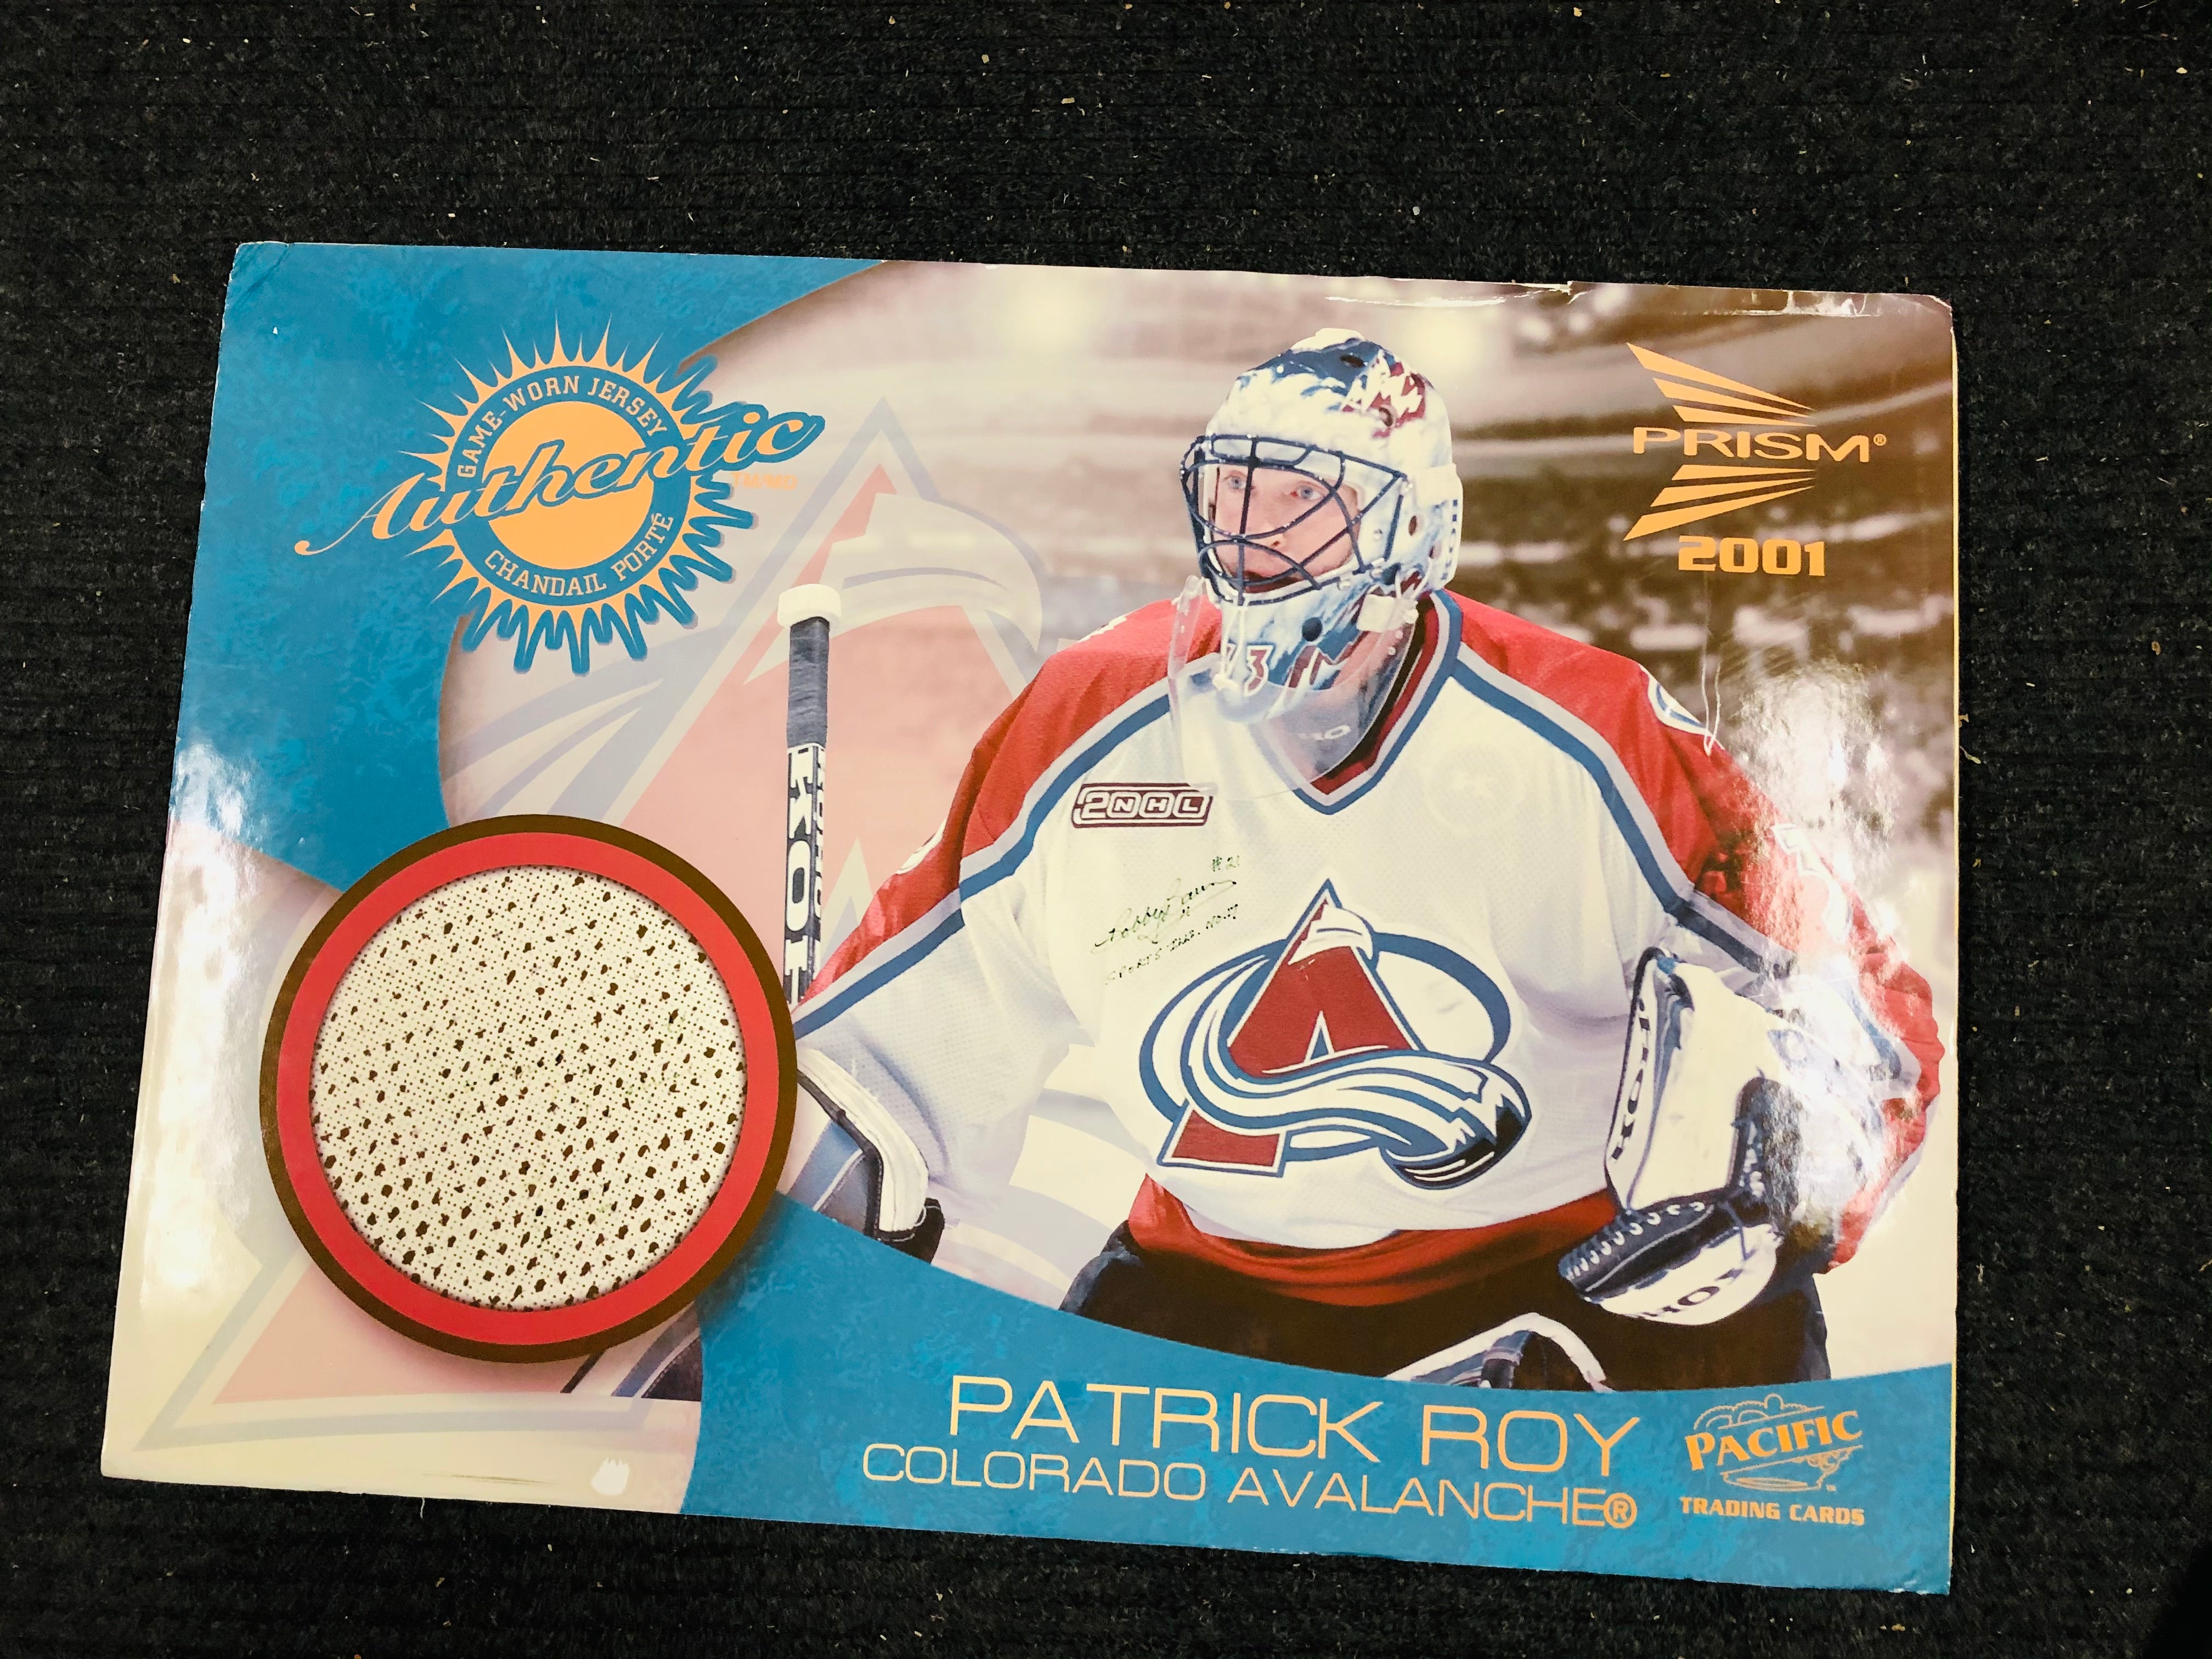 Patrick Roy Pacific large hockey card poster signed by Bobby Baun 2001